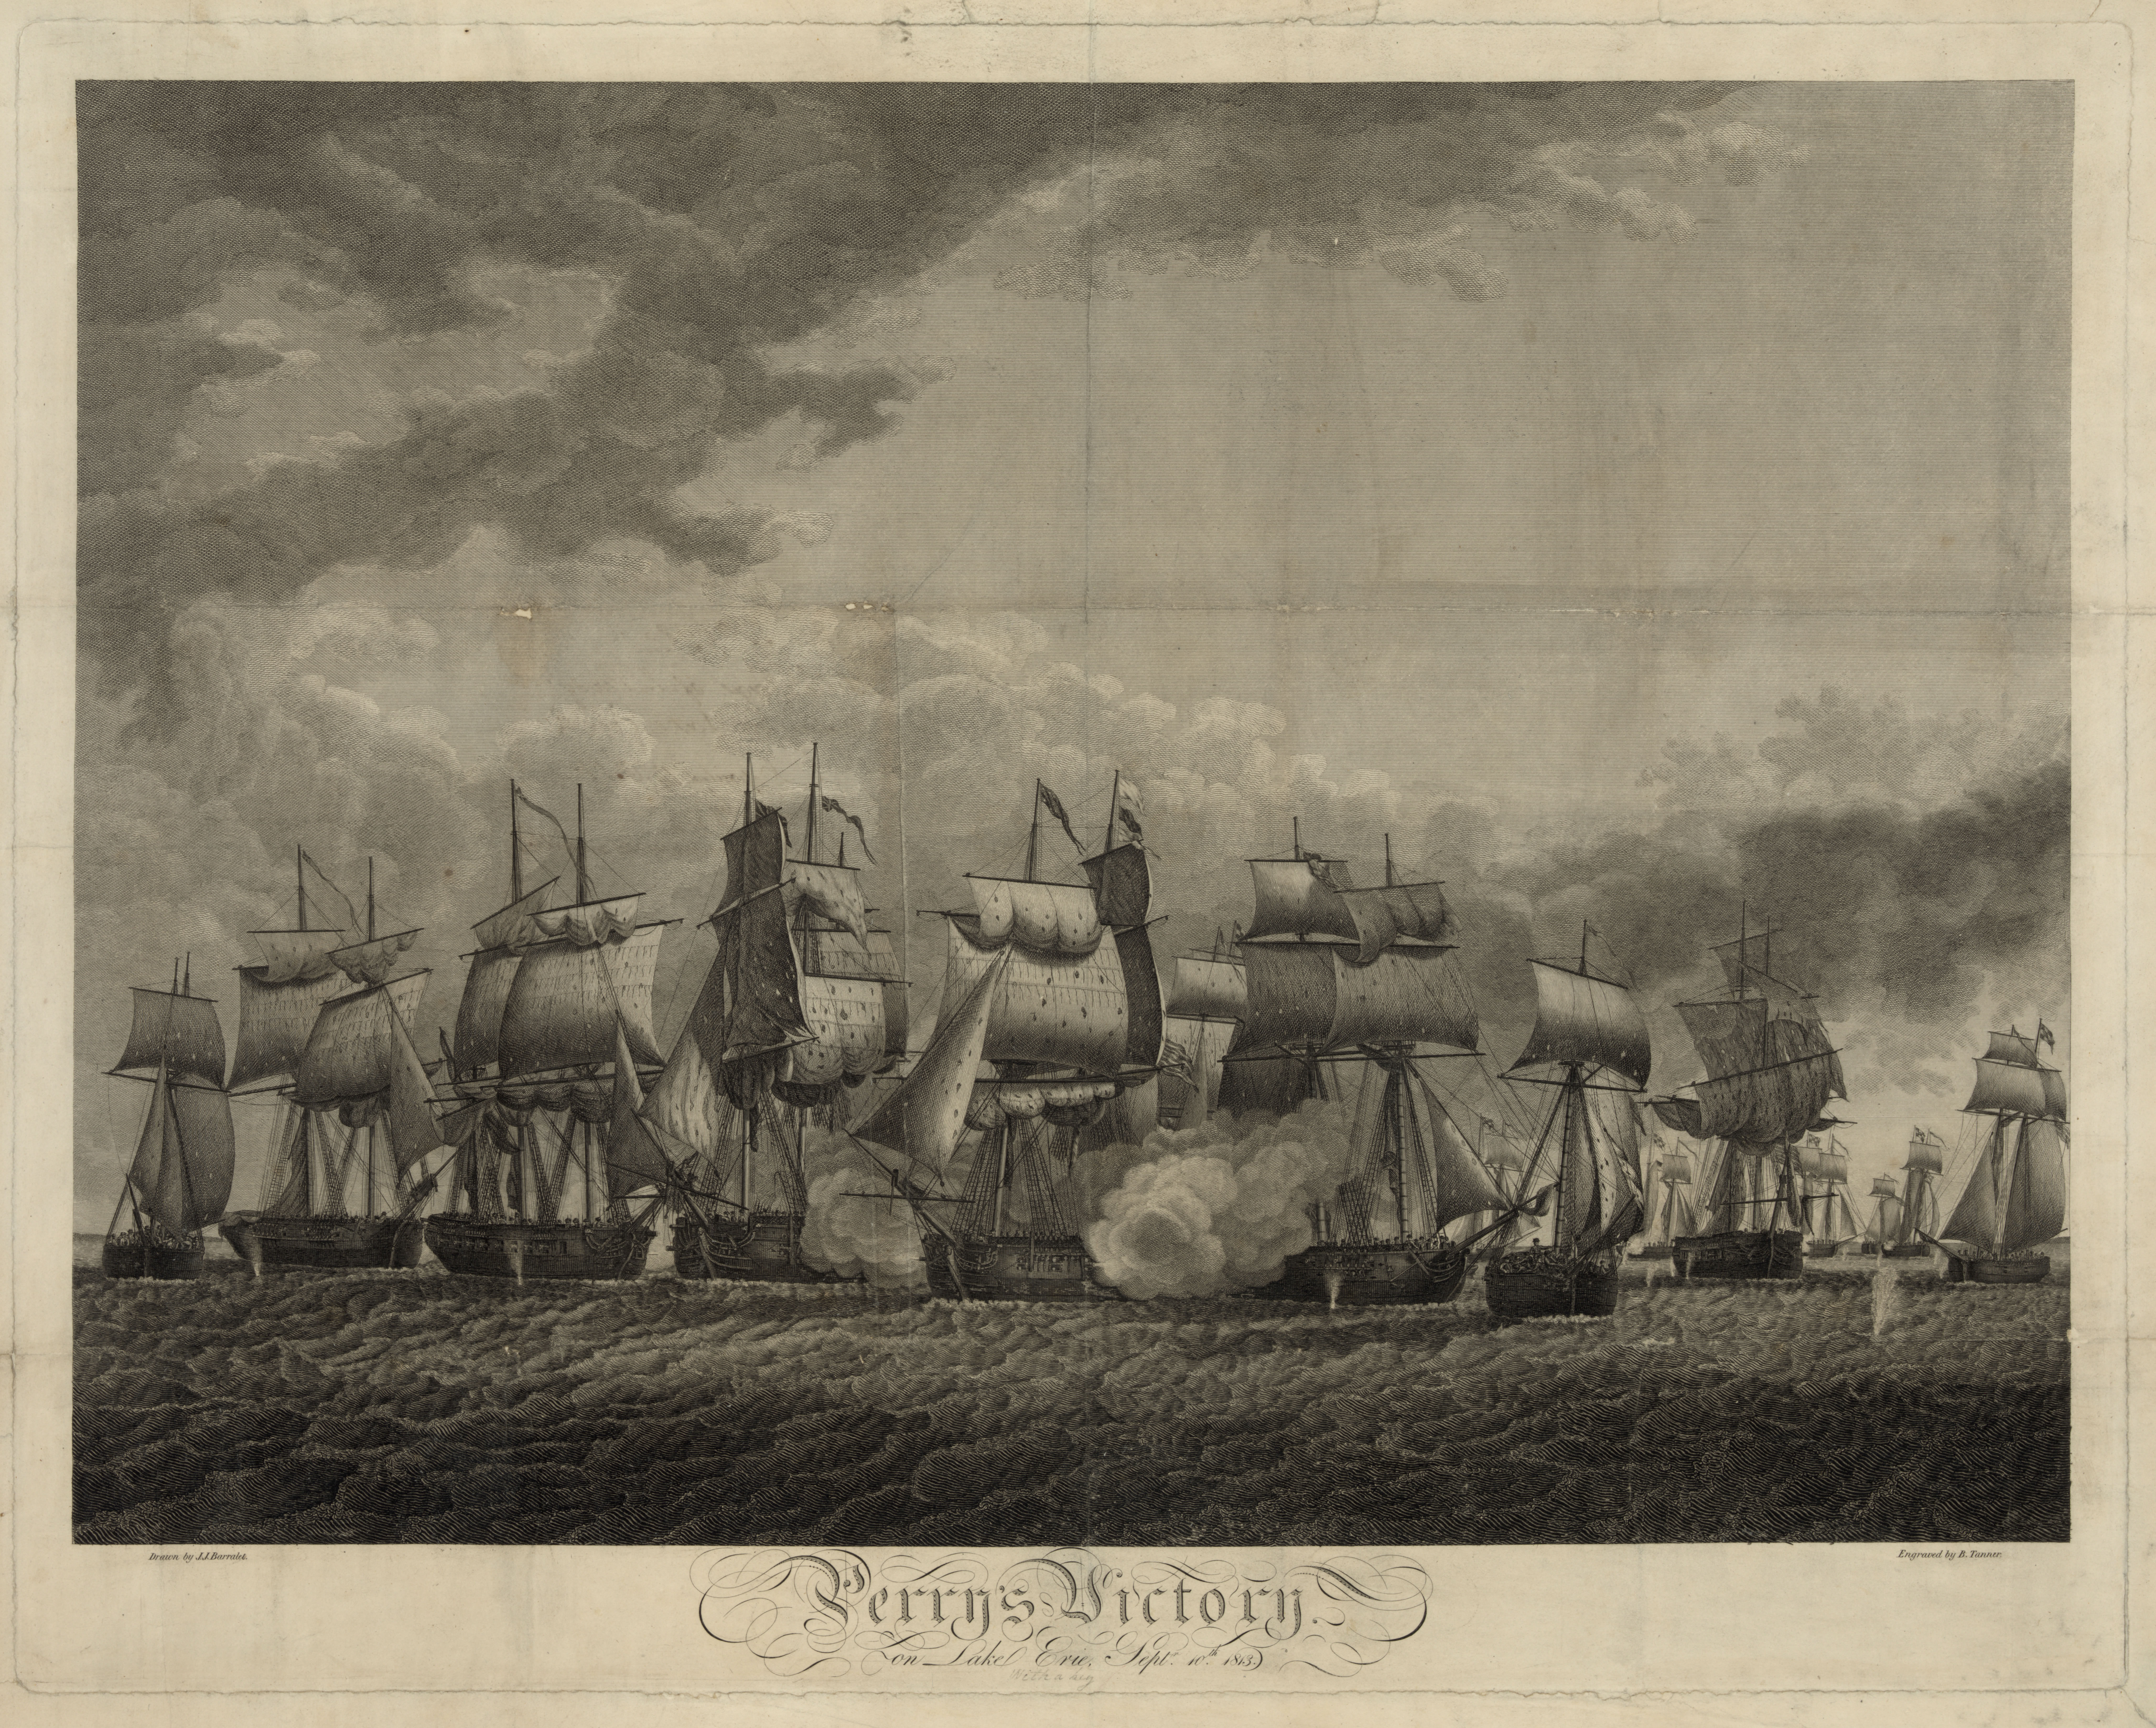 Engraving of Perry's Victory at the Battle of Lake Erie